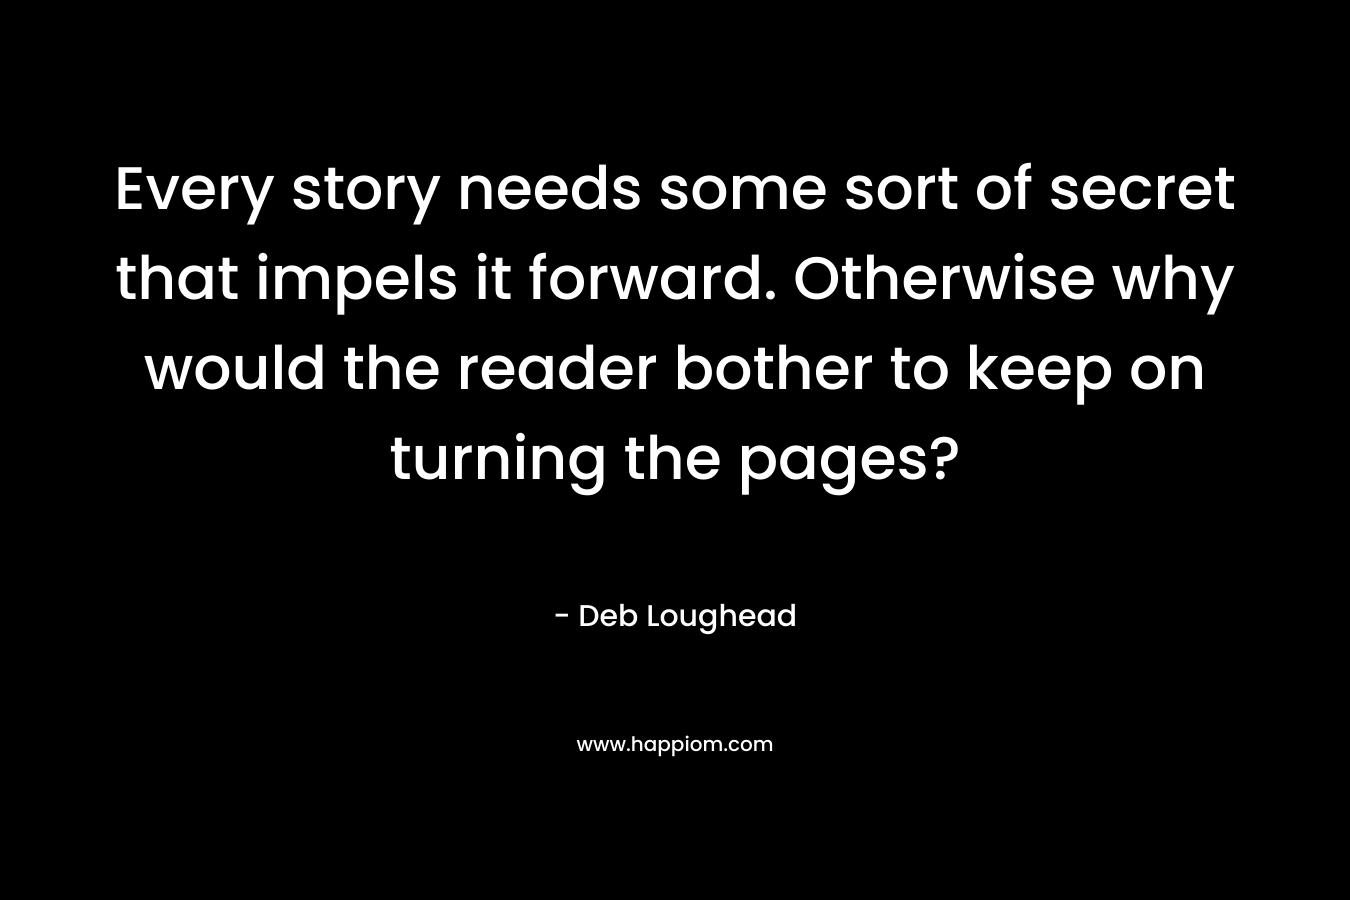 Every story needs some sort of secret that impels it forward. Otherwise why would the reader bother to keep on turning the pages?